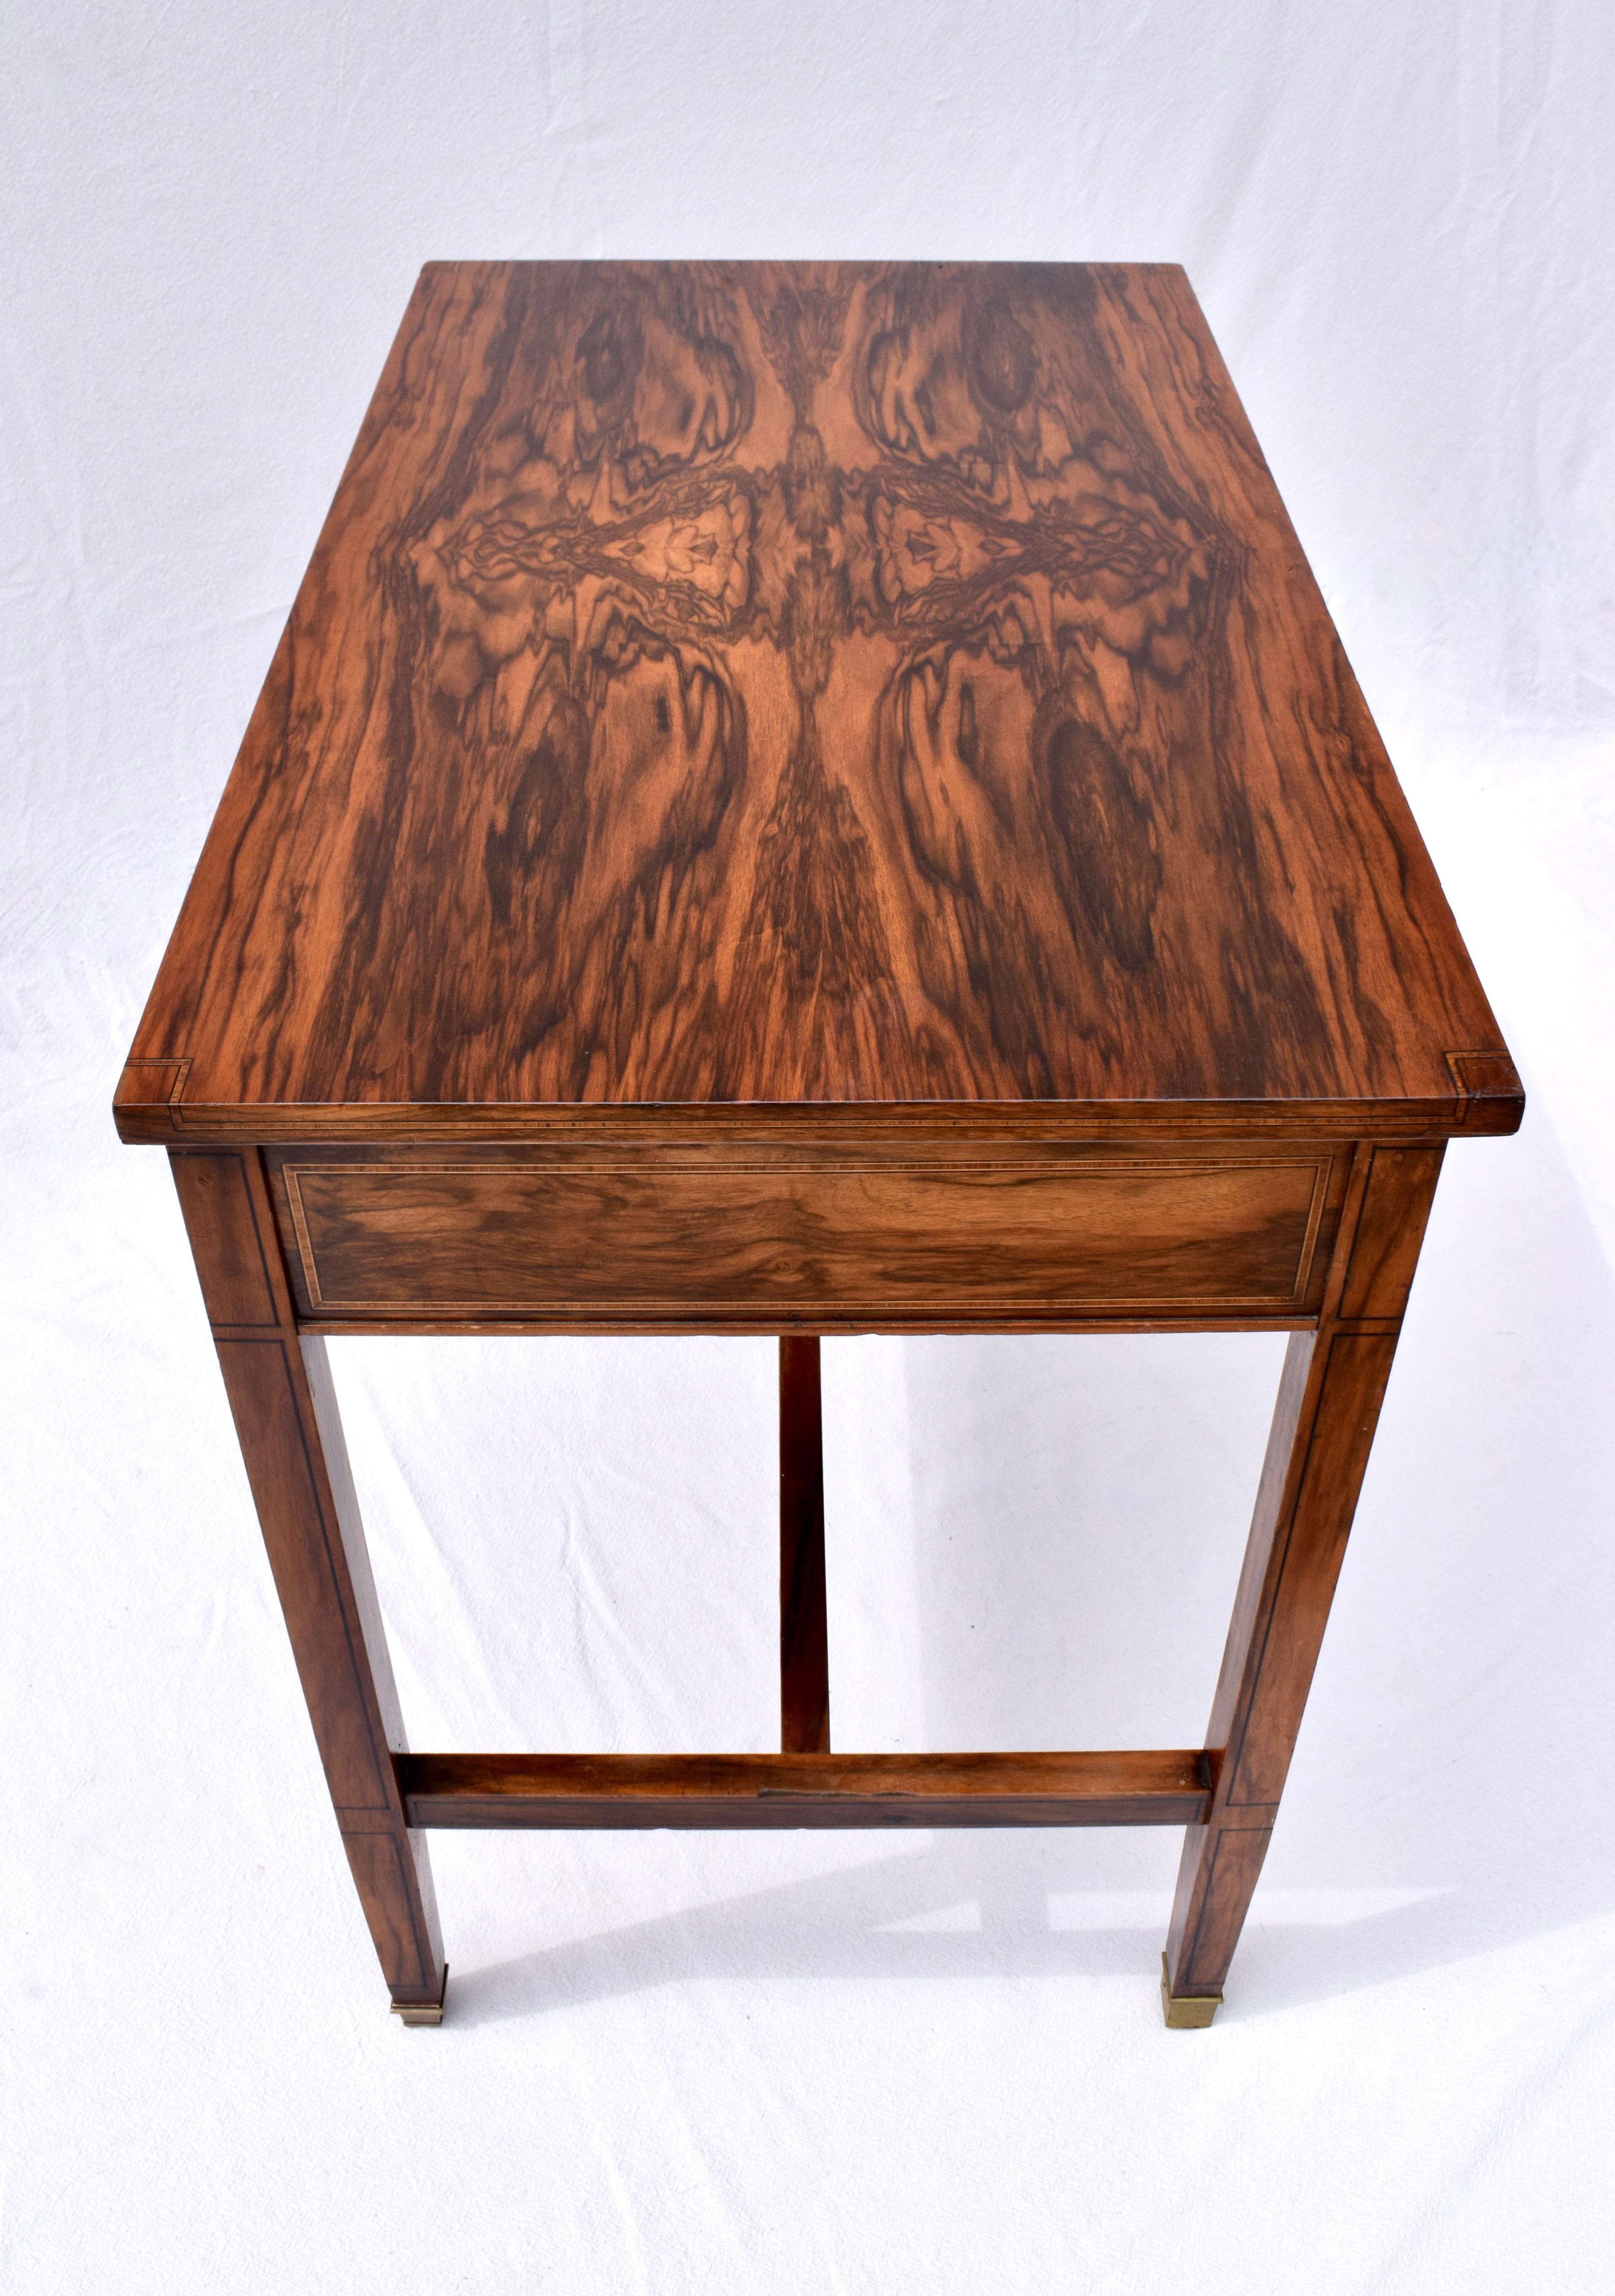 19th Century Directoire Influenced Book-Matched Rosewood Writing Table or Desk For Sale 1